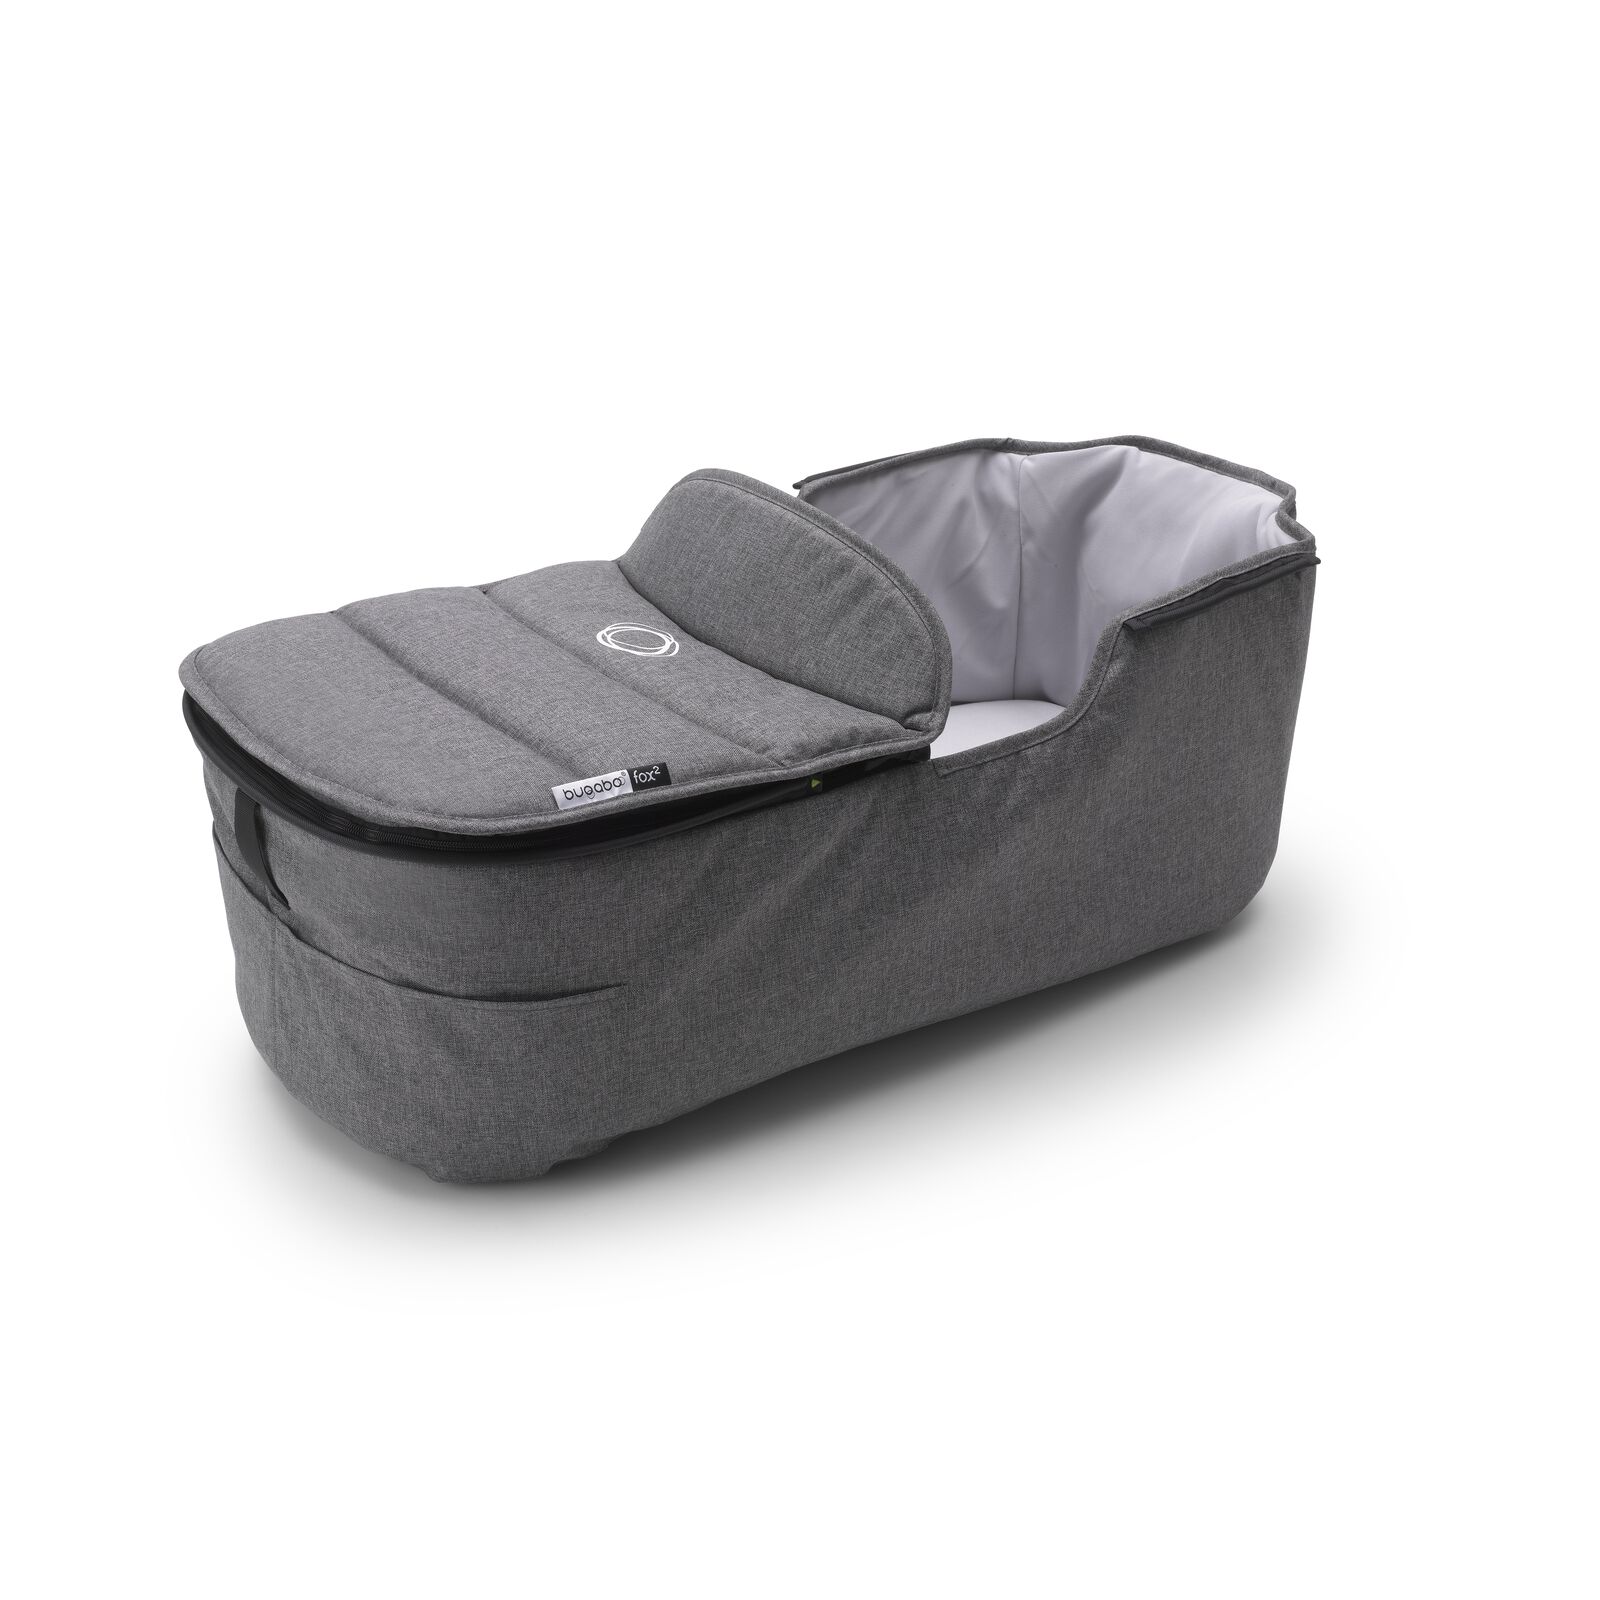 Bugaboo Fox 2 carrycot fabric set - View 1